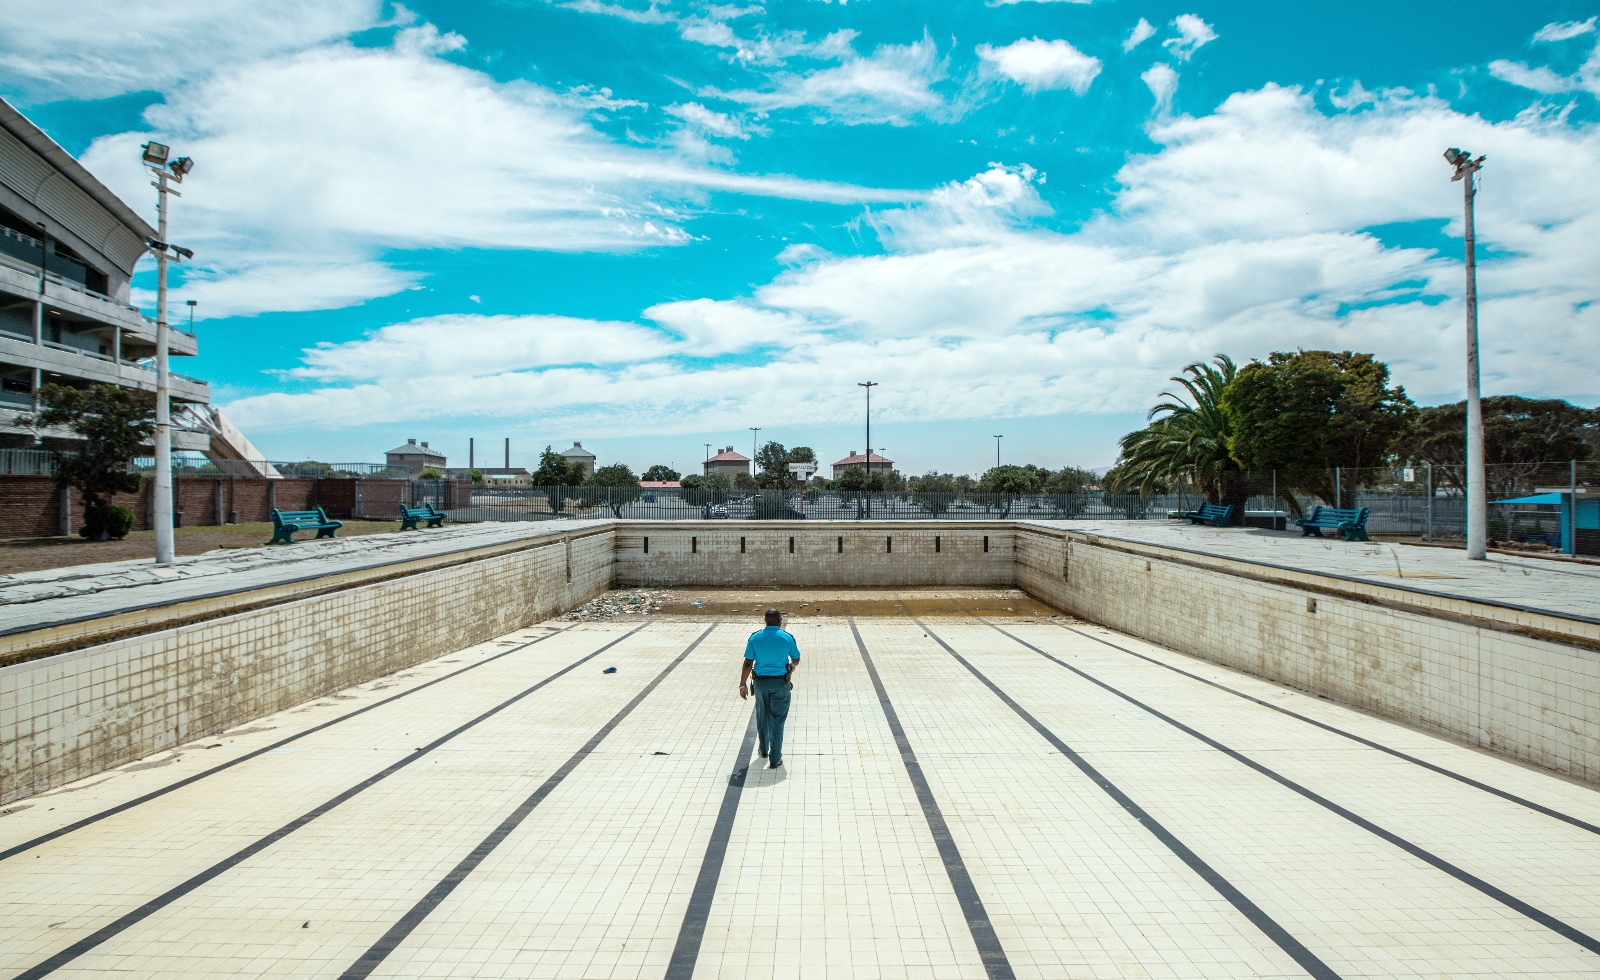 A police officer inspects an empty public swimming pool in Cape Town, South Africa. The city government managed to beat a drought crisis in 2018 by reducing domestic water usage to unprecedented lows.